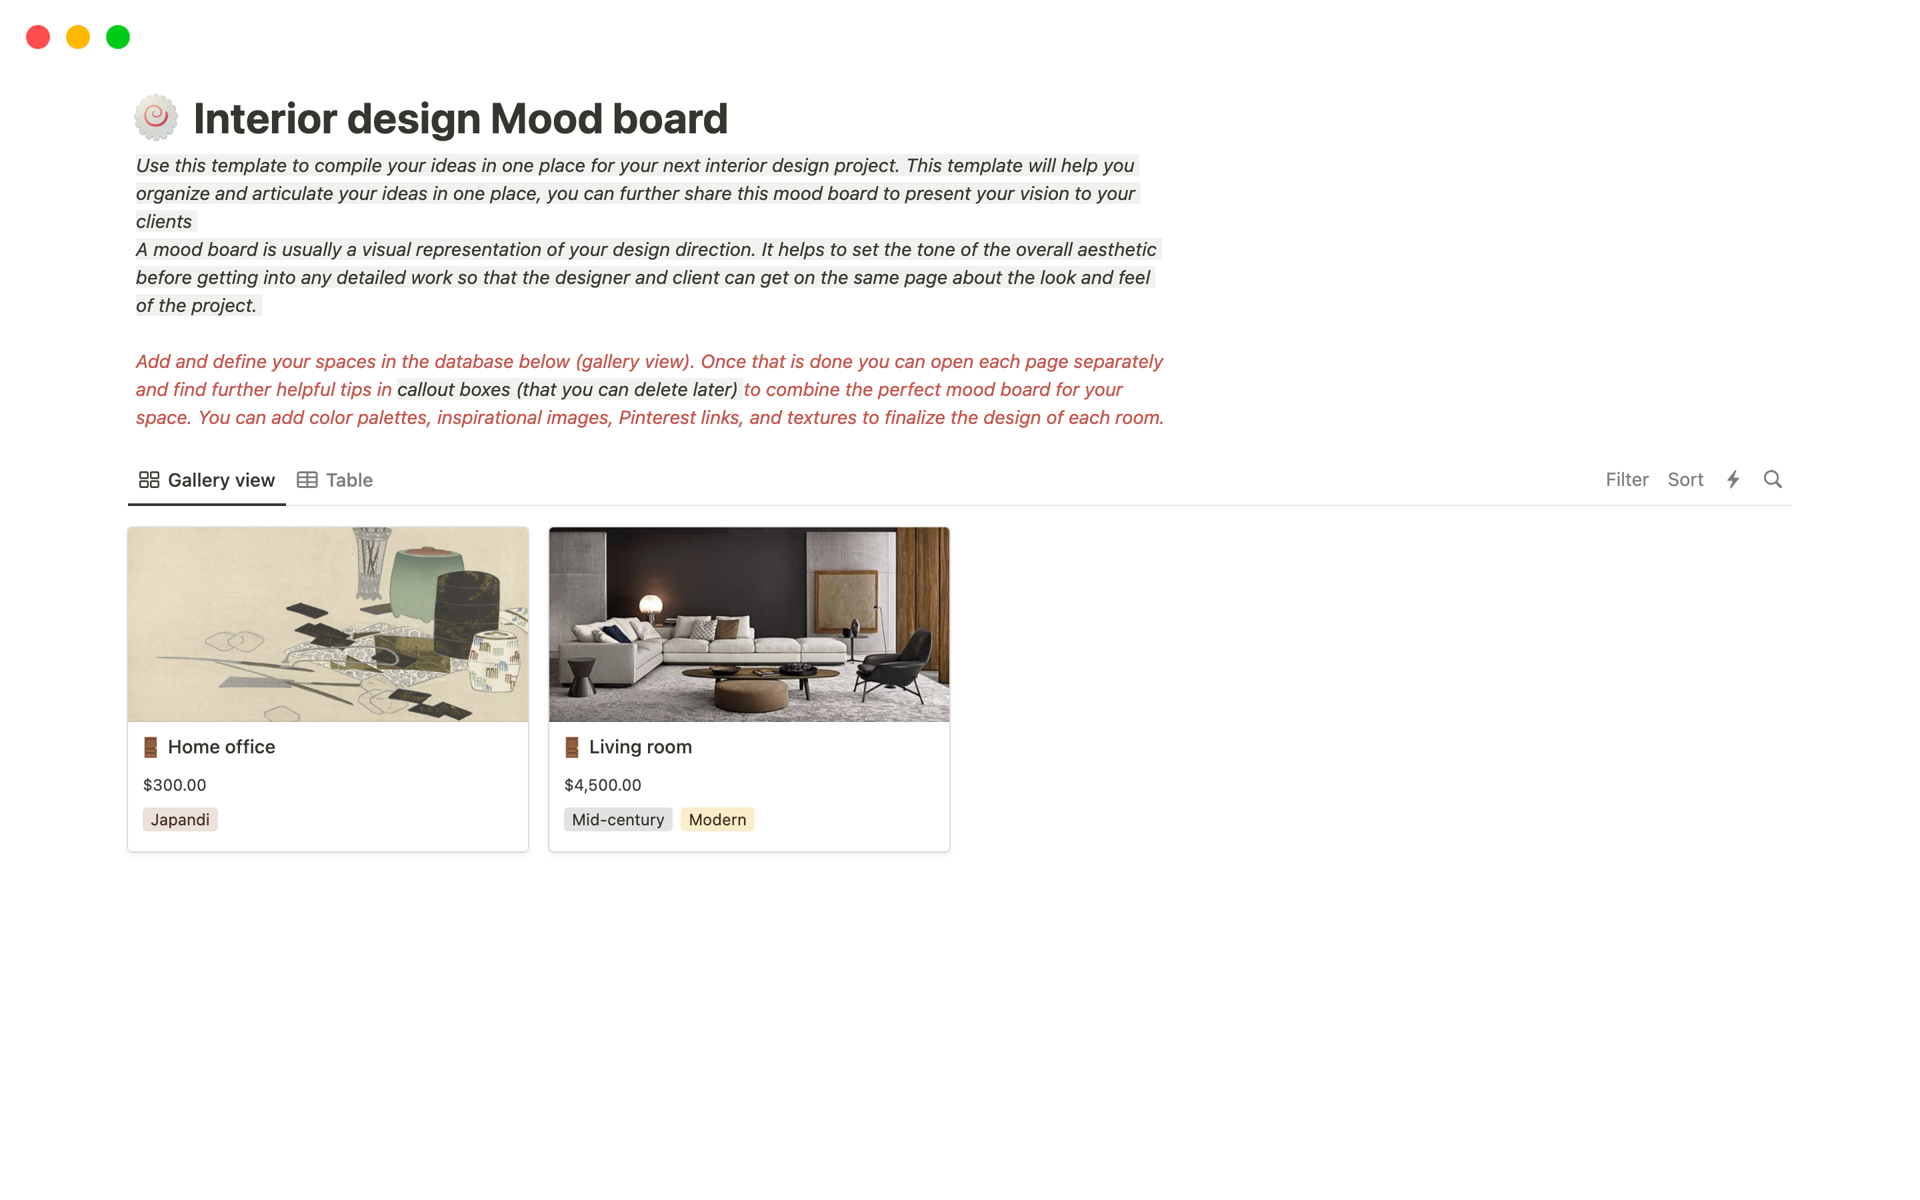 Minimal Interior design Mood board - Compile all your ideas and design vision in one place 